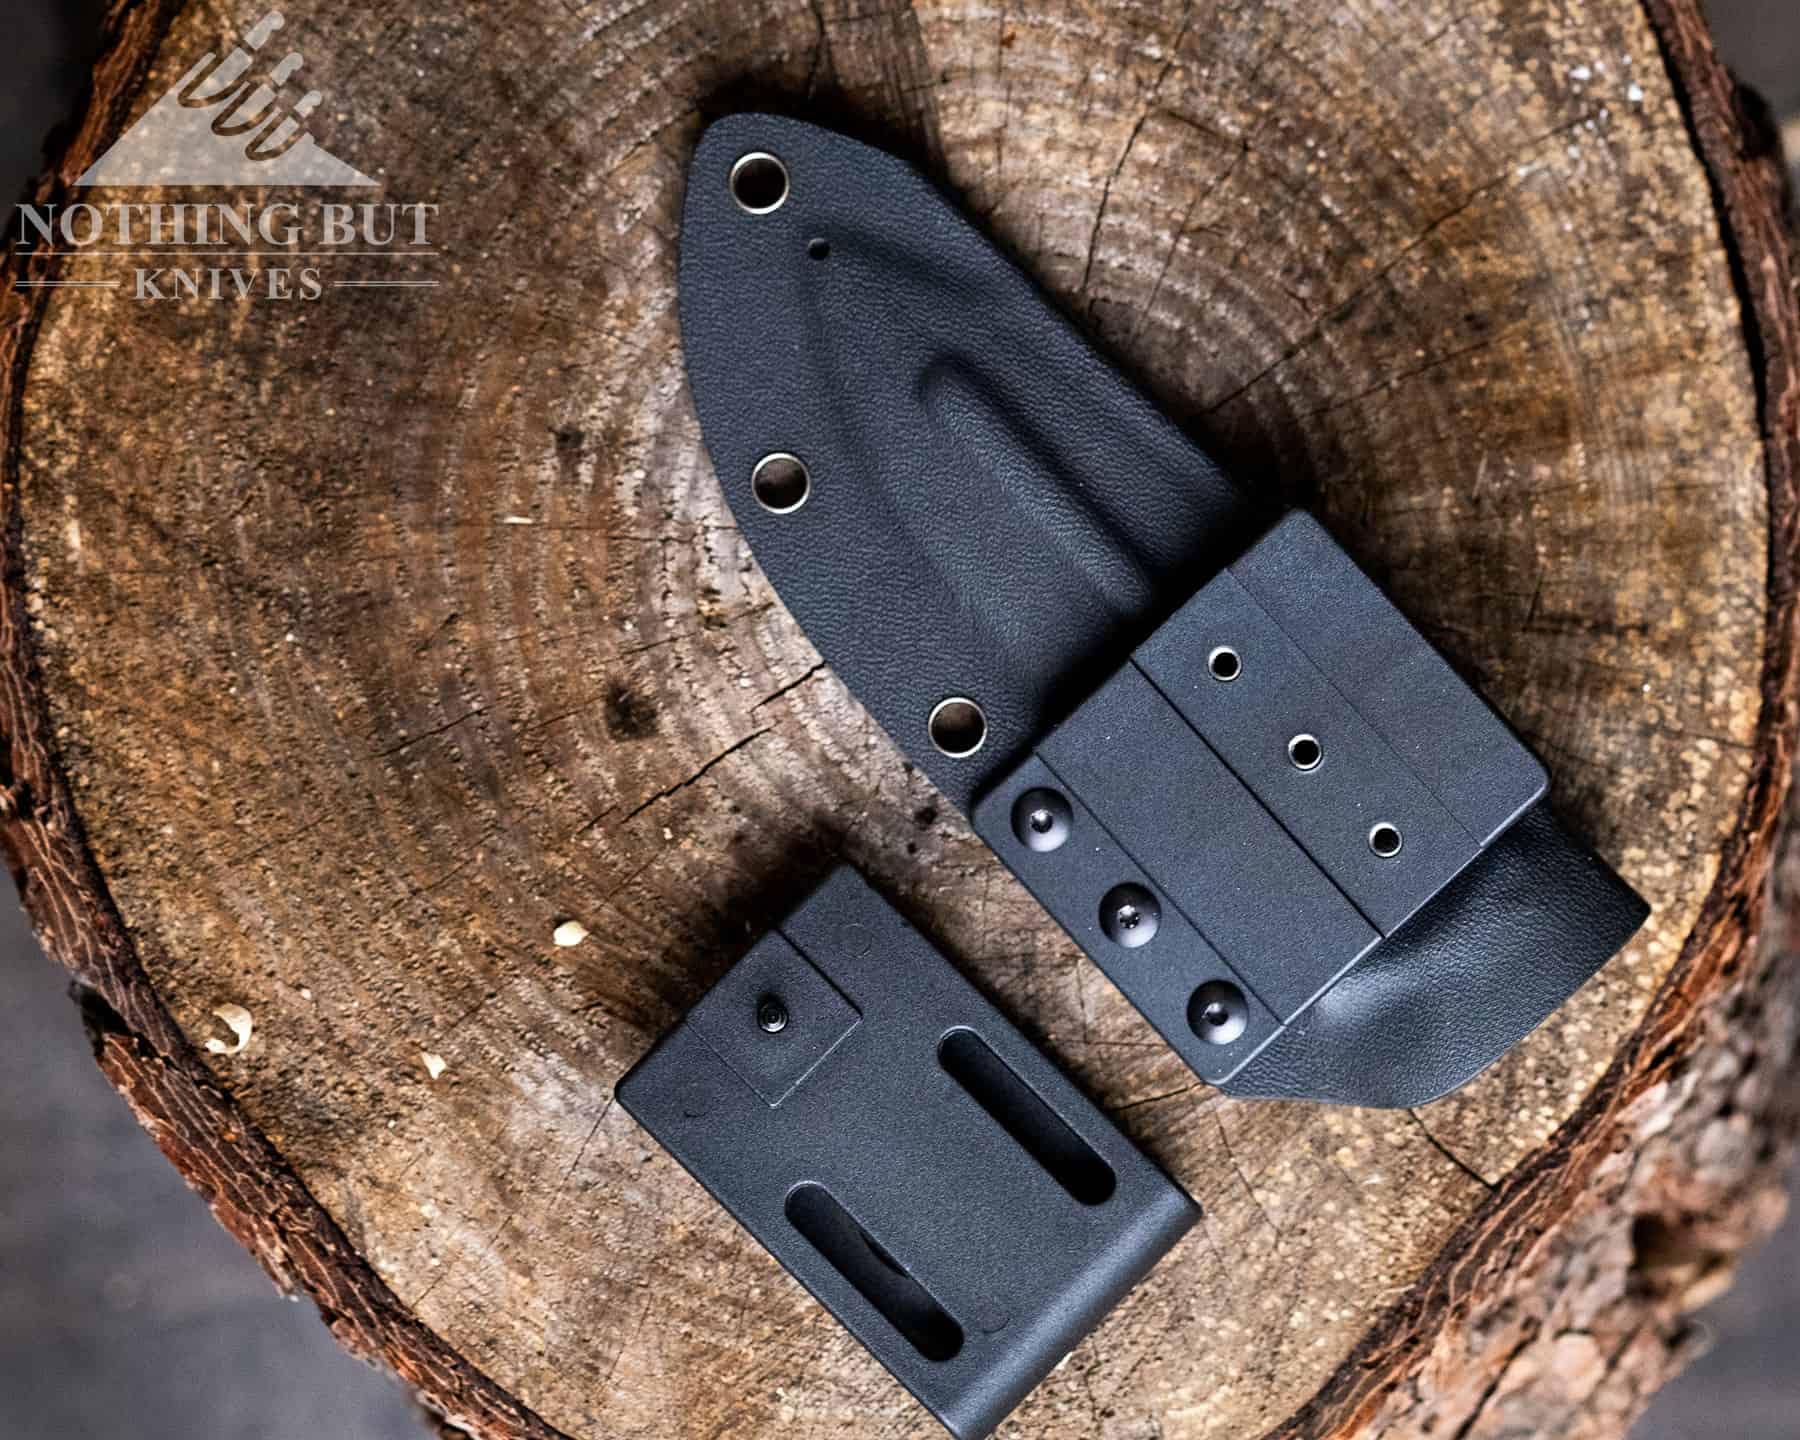 The Artisan Wreckhart sheath can be disassembled and adjusted. 